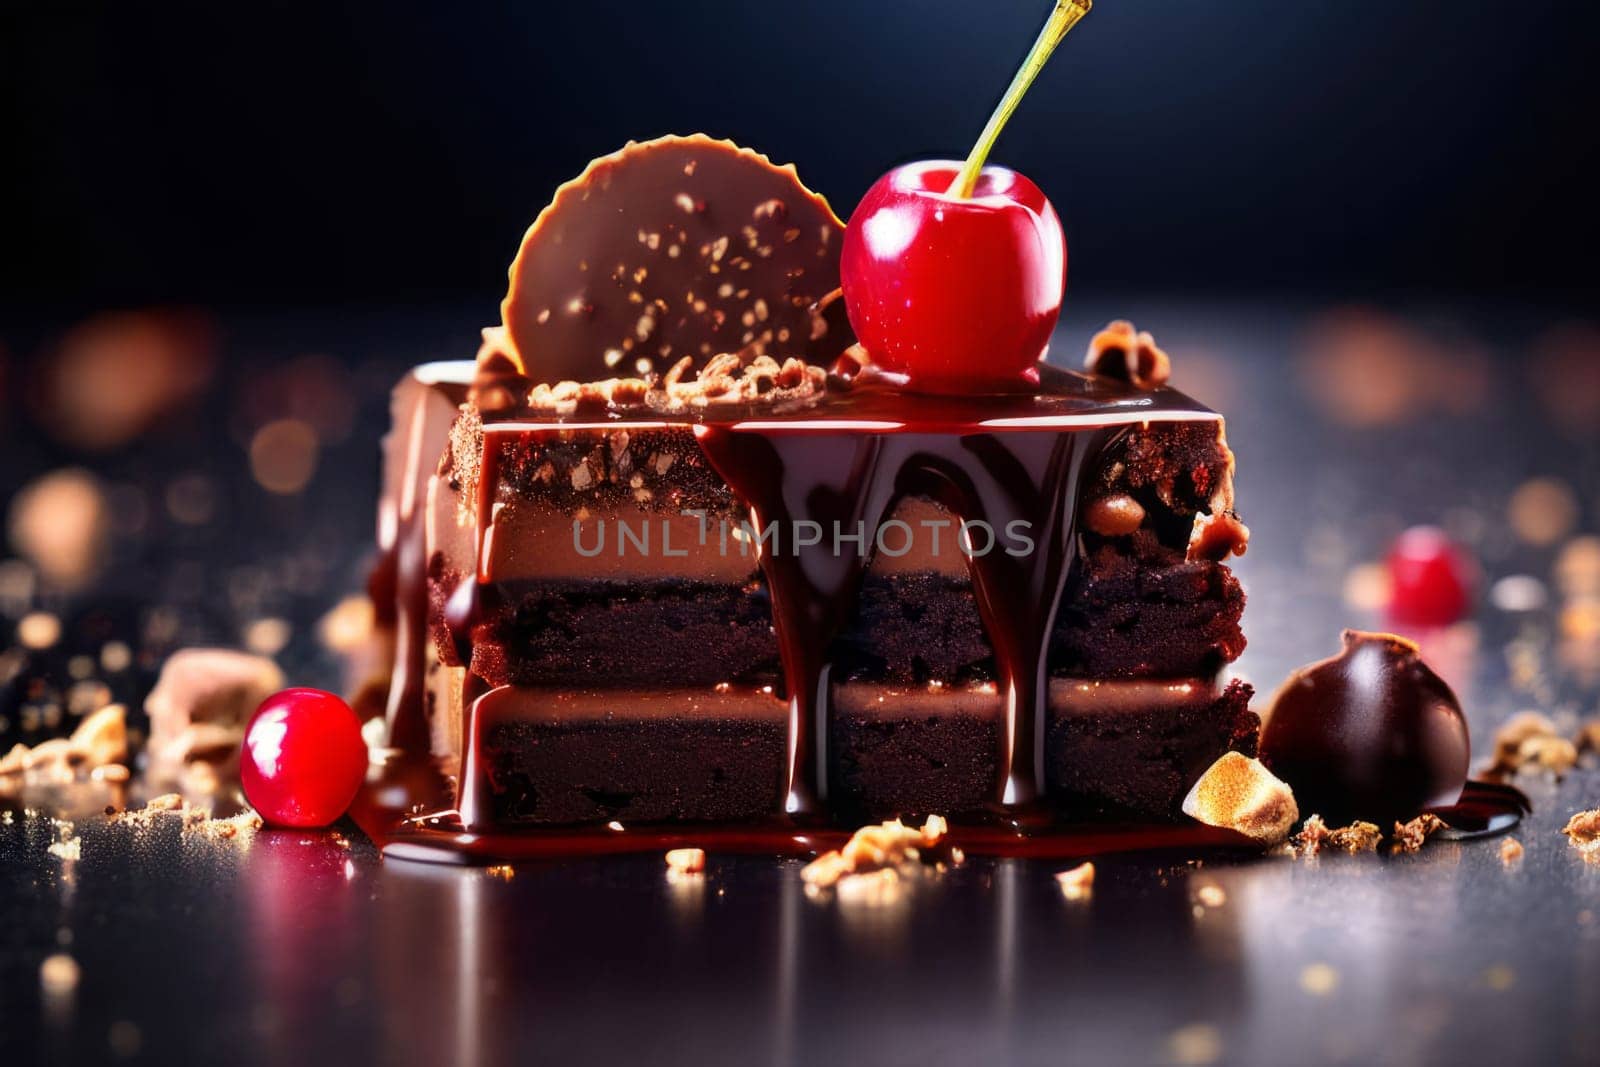 Decadent chocolate cake topped with luscious cherries, drizzled with rich chocolate sauce. For creating recipes on culinary websites, blogs, promoting food products on social media platforms